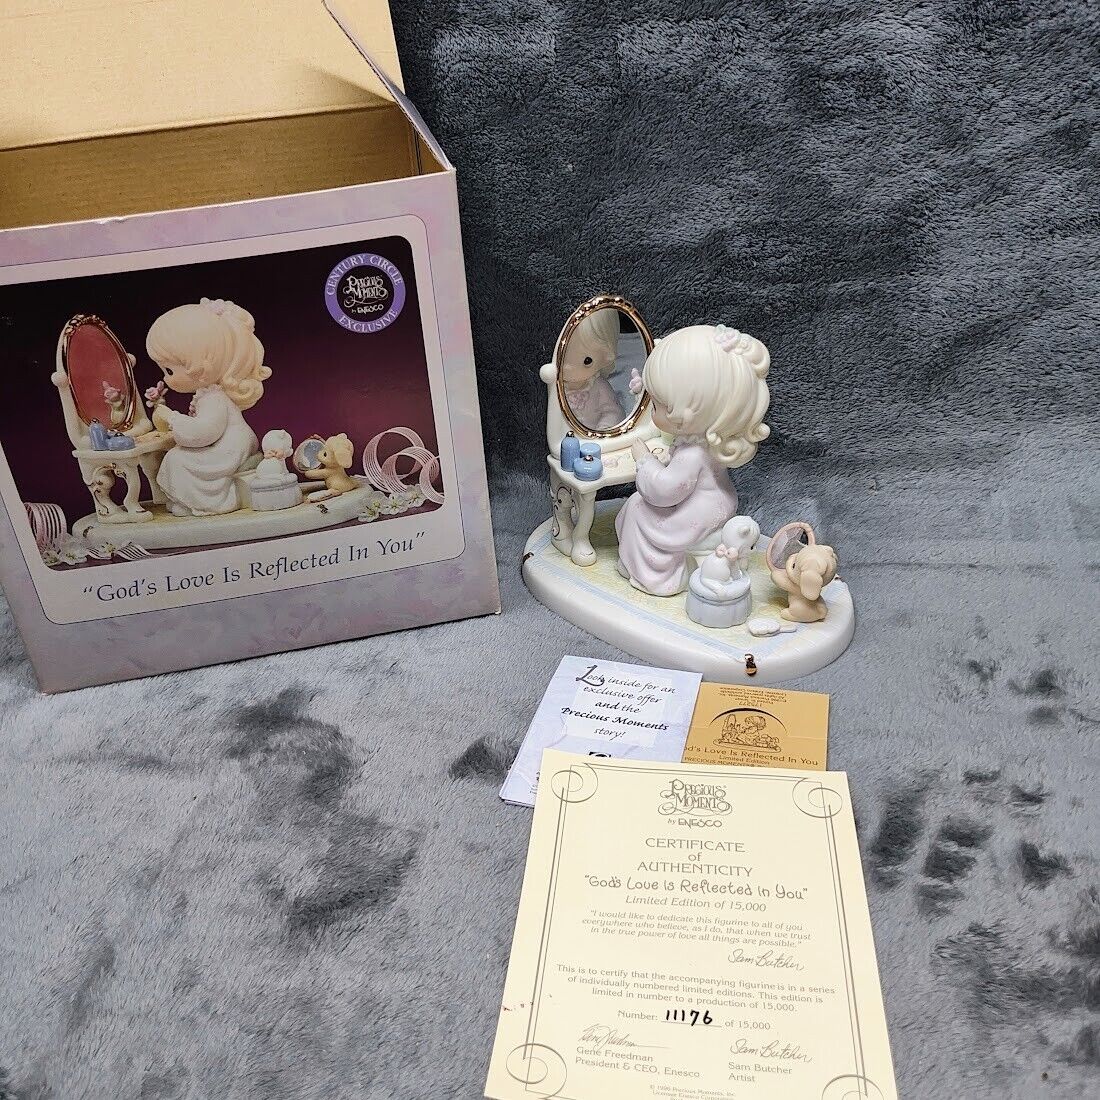 Precious Moments “God’s Love Is Reflected In You”   175277 in box w/ certificate